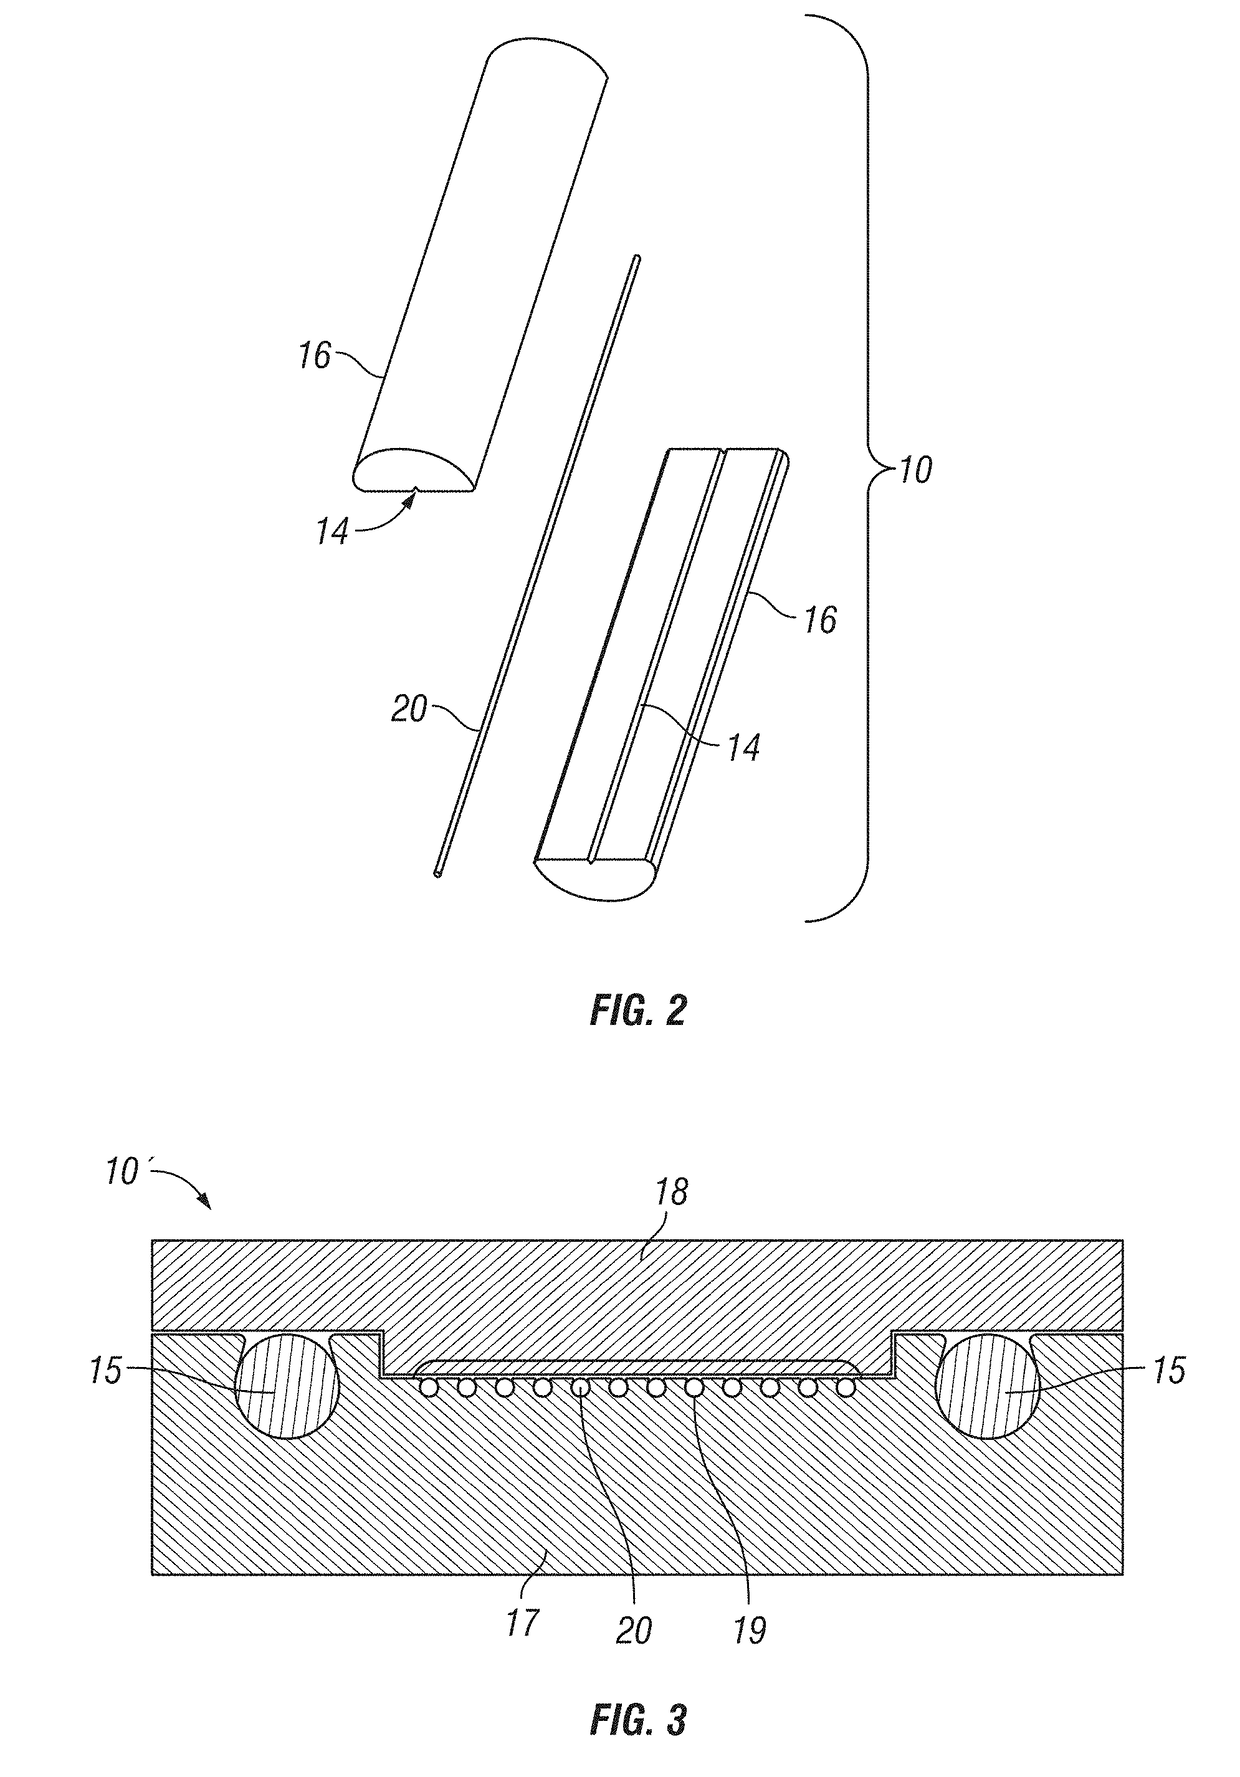 Method of laser polishing a connectorized optical fiber and a connectorized optical fiber formed in accordance therewith